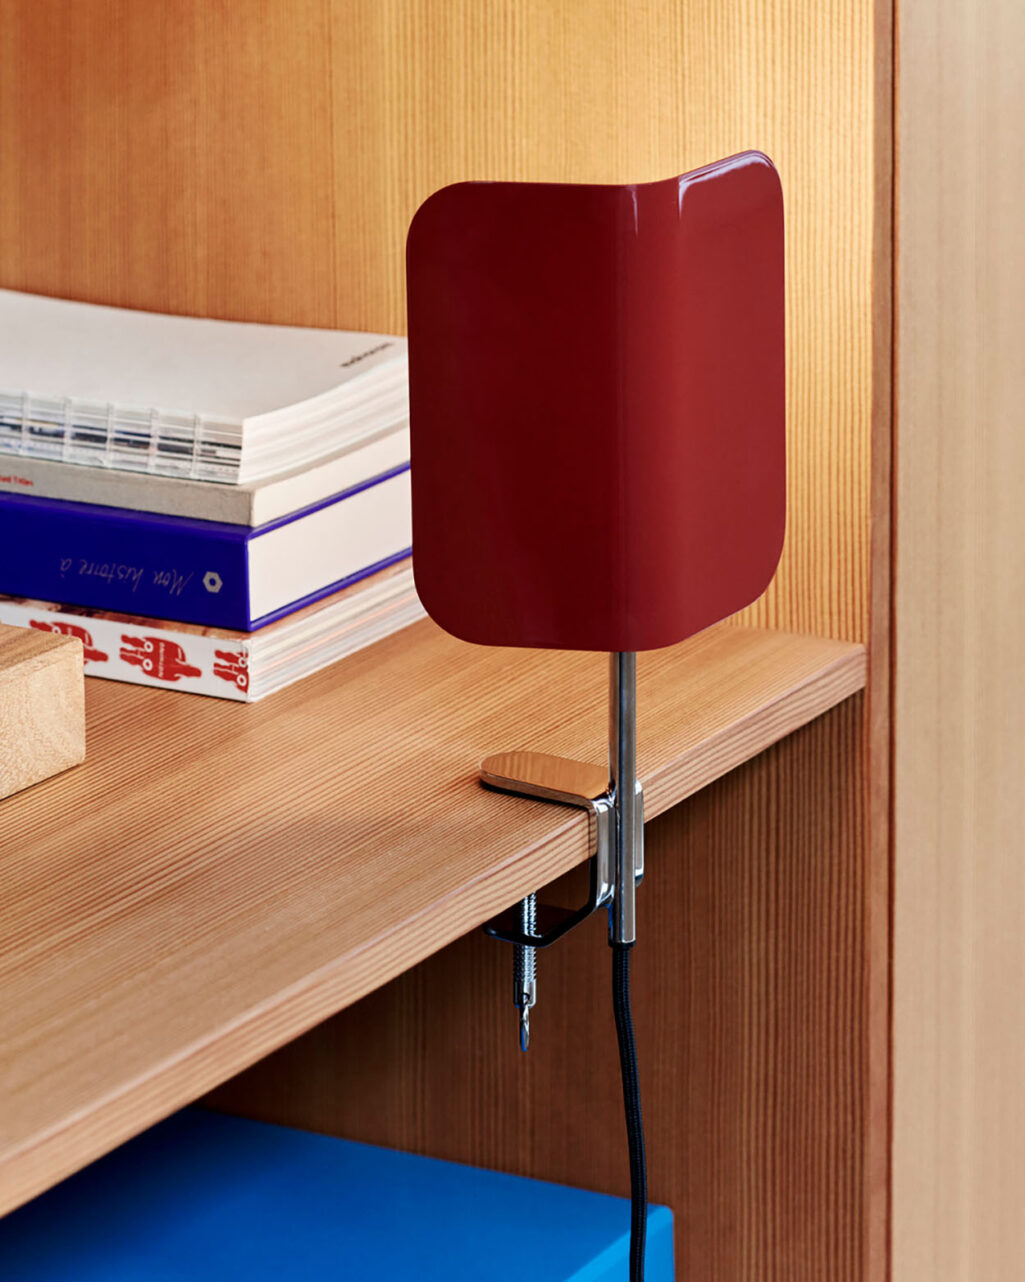 The Apex clip lamp in Maroon Red